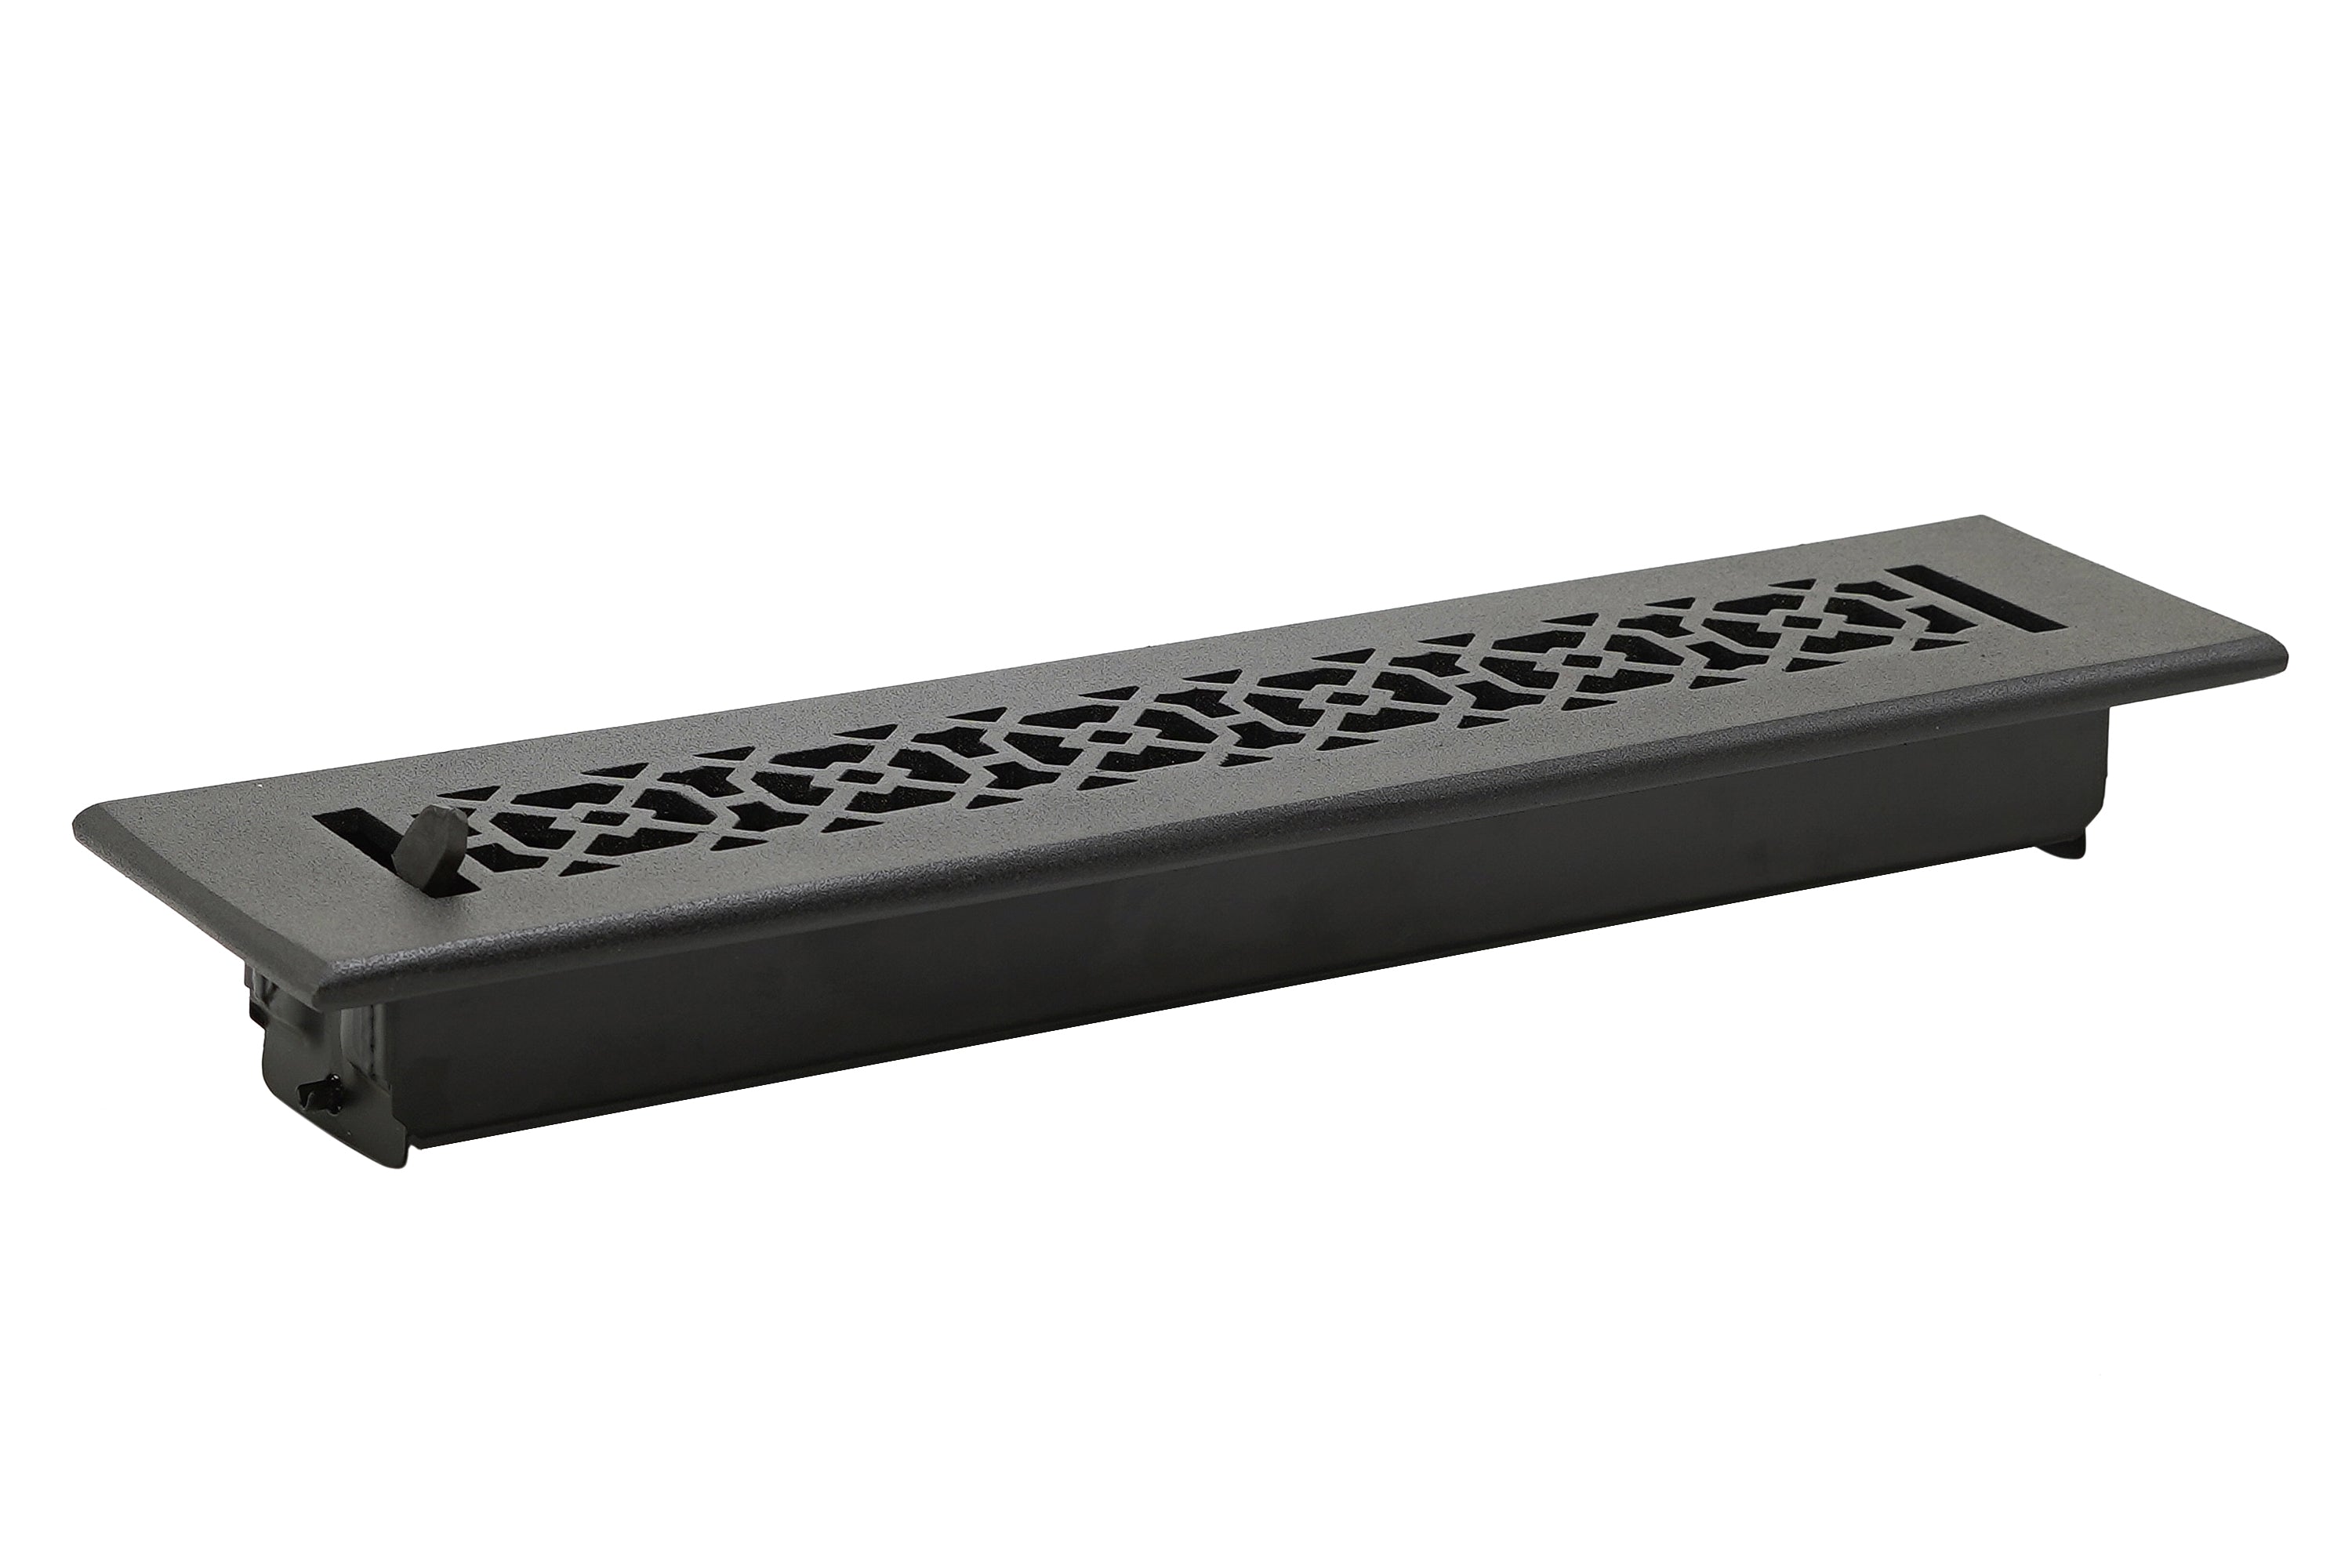 Achtek Air Supply Vent 2"x 14" Duct Opening (Overall 3-3/4"x 15-3/4") Solid Cast Aluminium Register Cover | Powder Coated